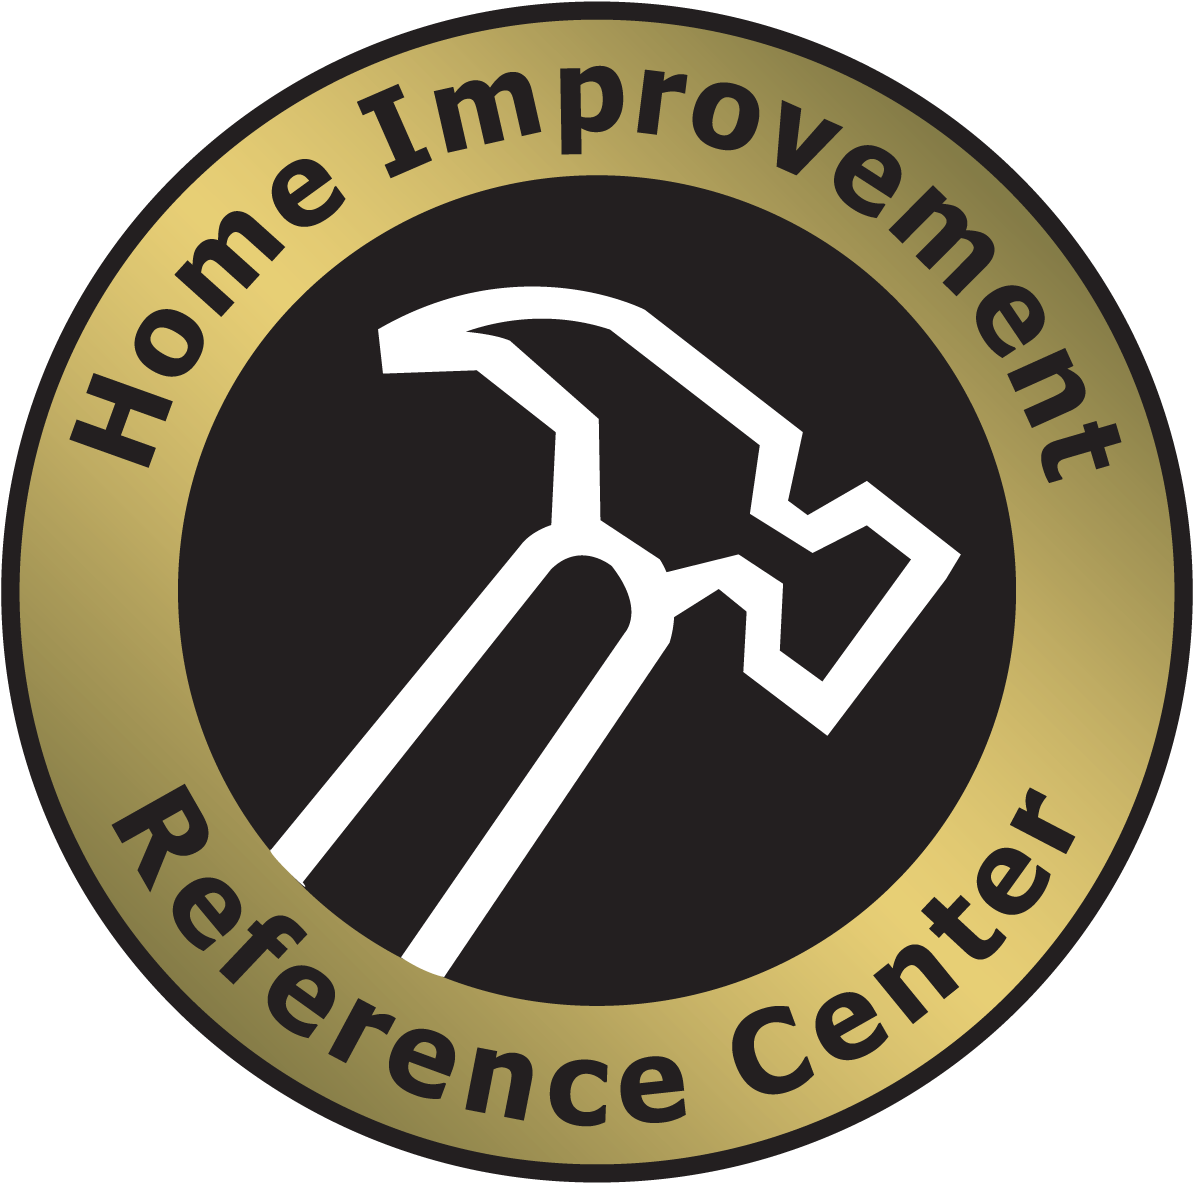 Home Improvement - Home Improvement Reference Center (1200x1200)